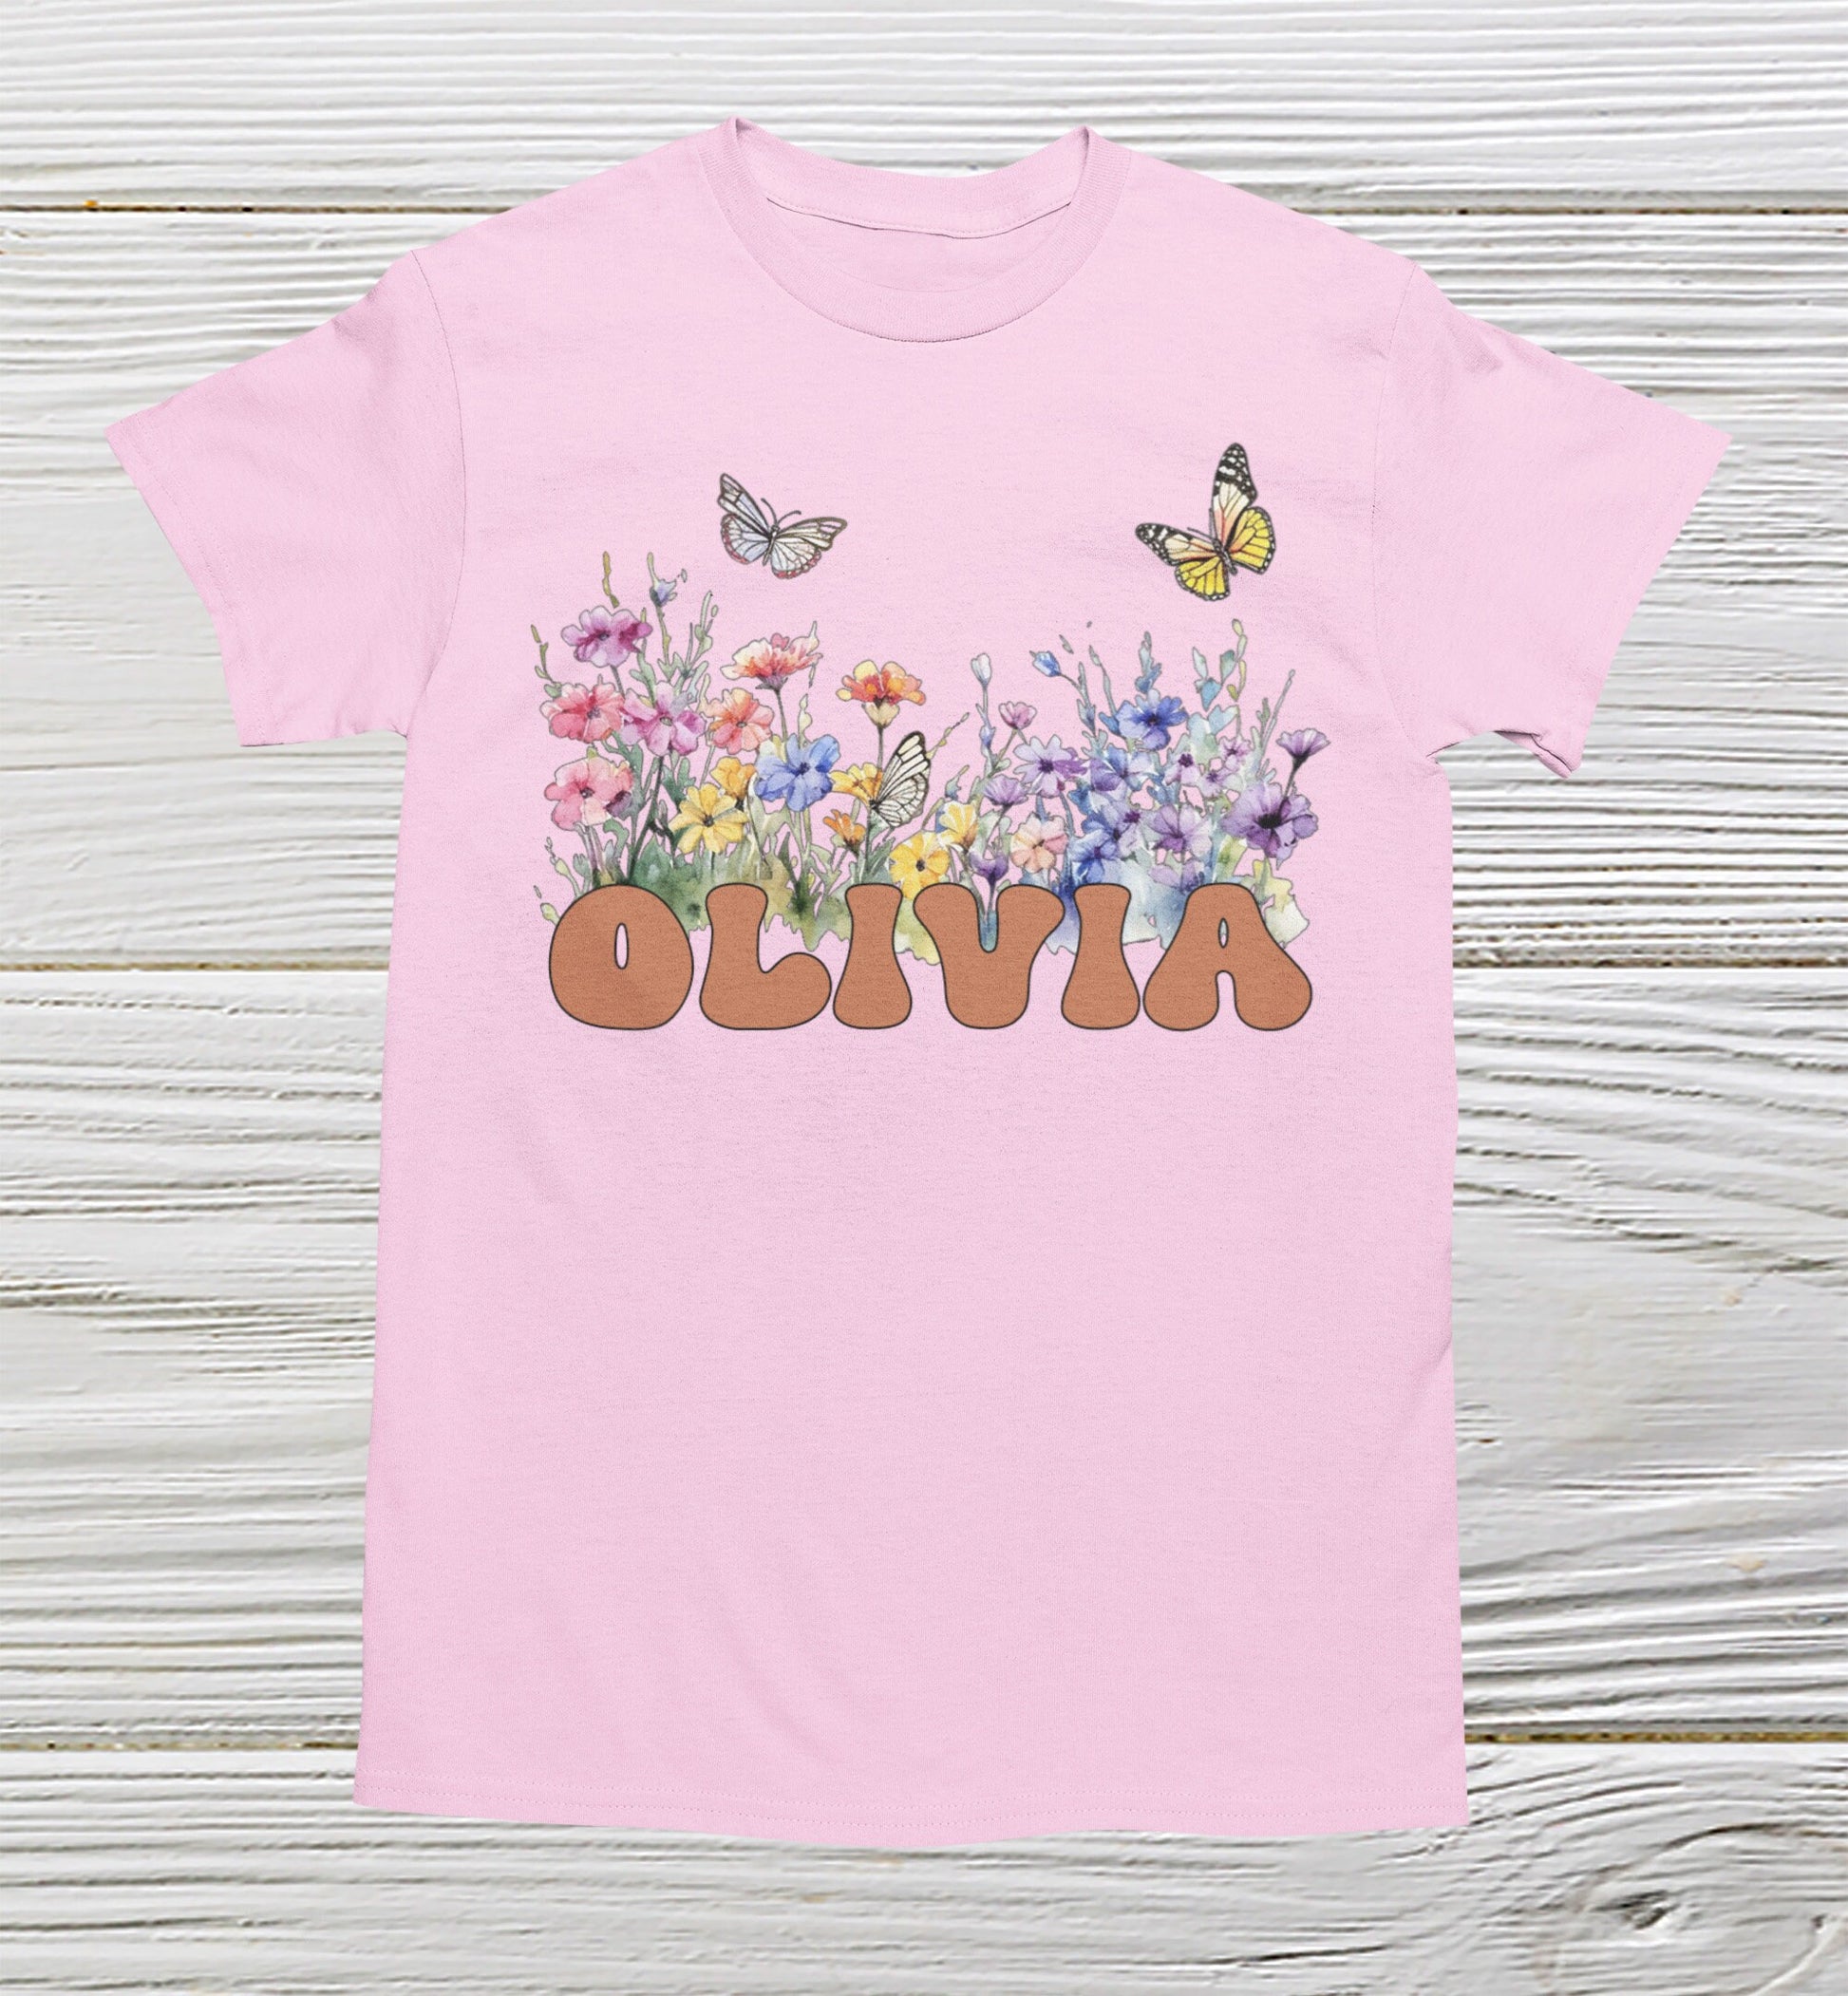 wildflower t shirt in Pink color shirt 